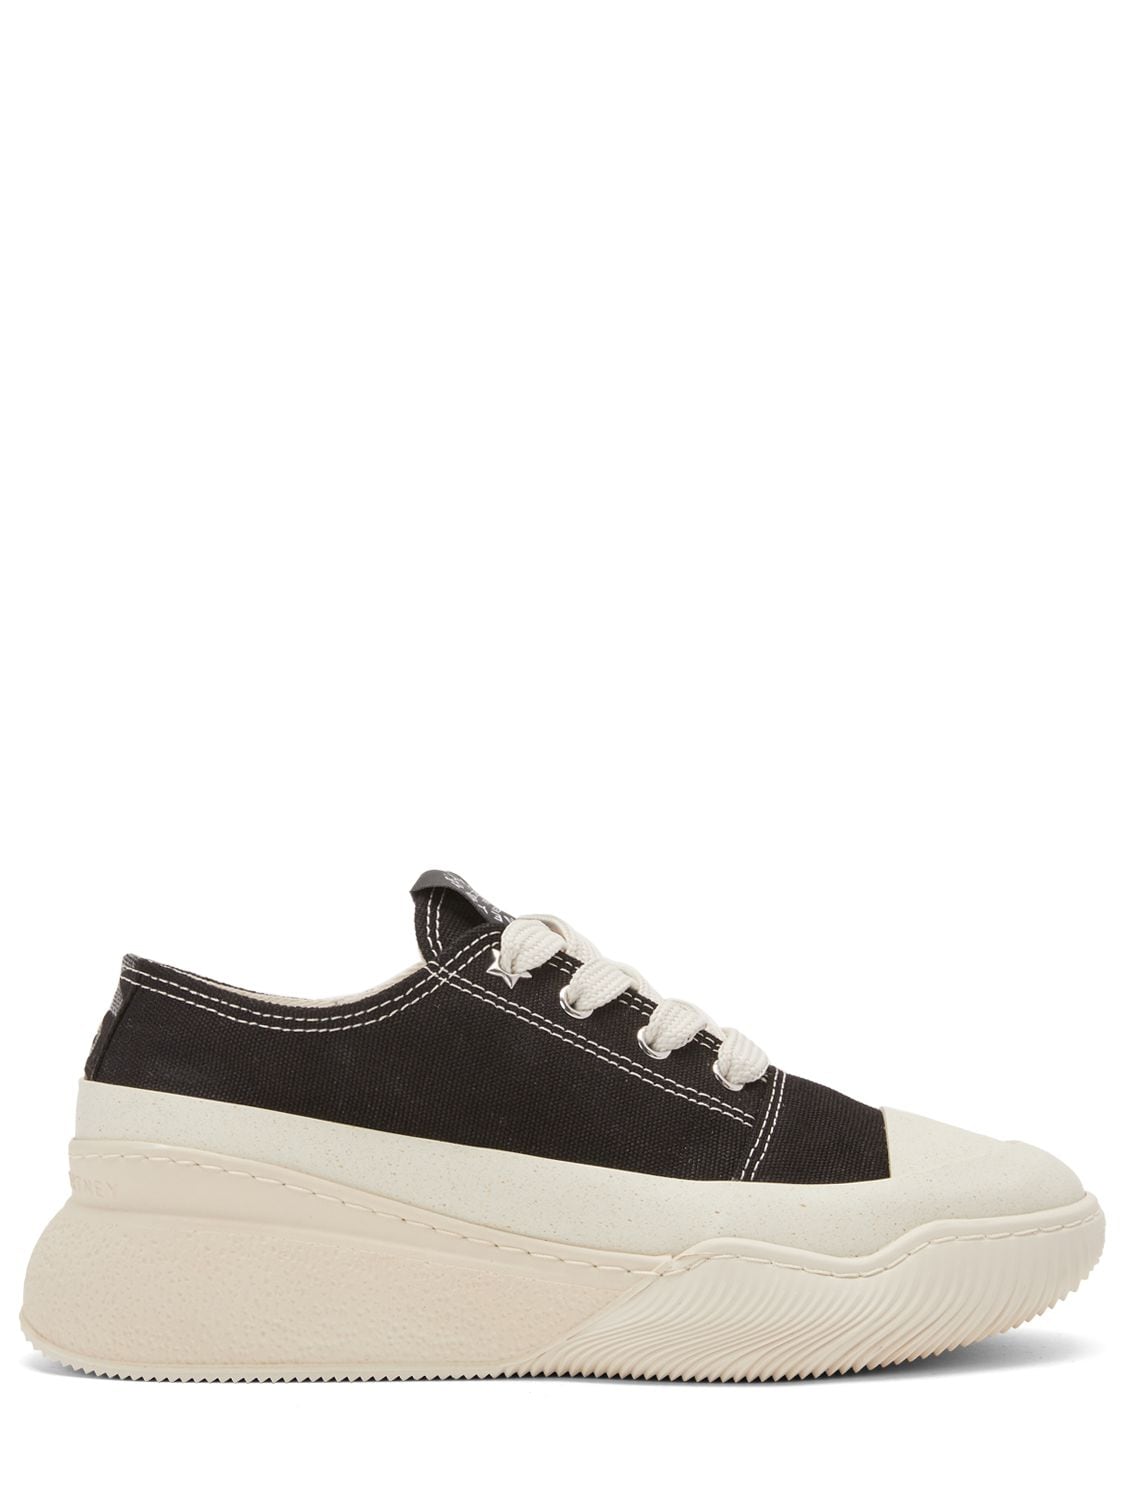 Stella Mccartney Loop Recycled Cotton Blend Trainers In Black,off-white